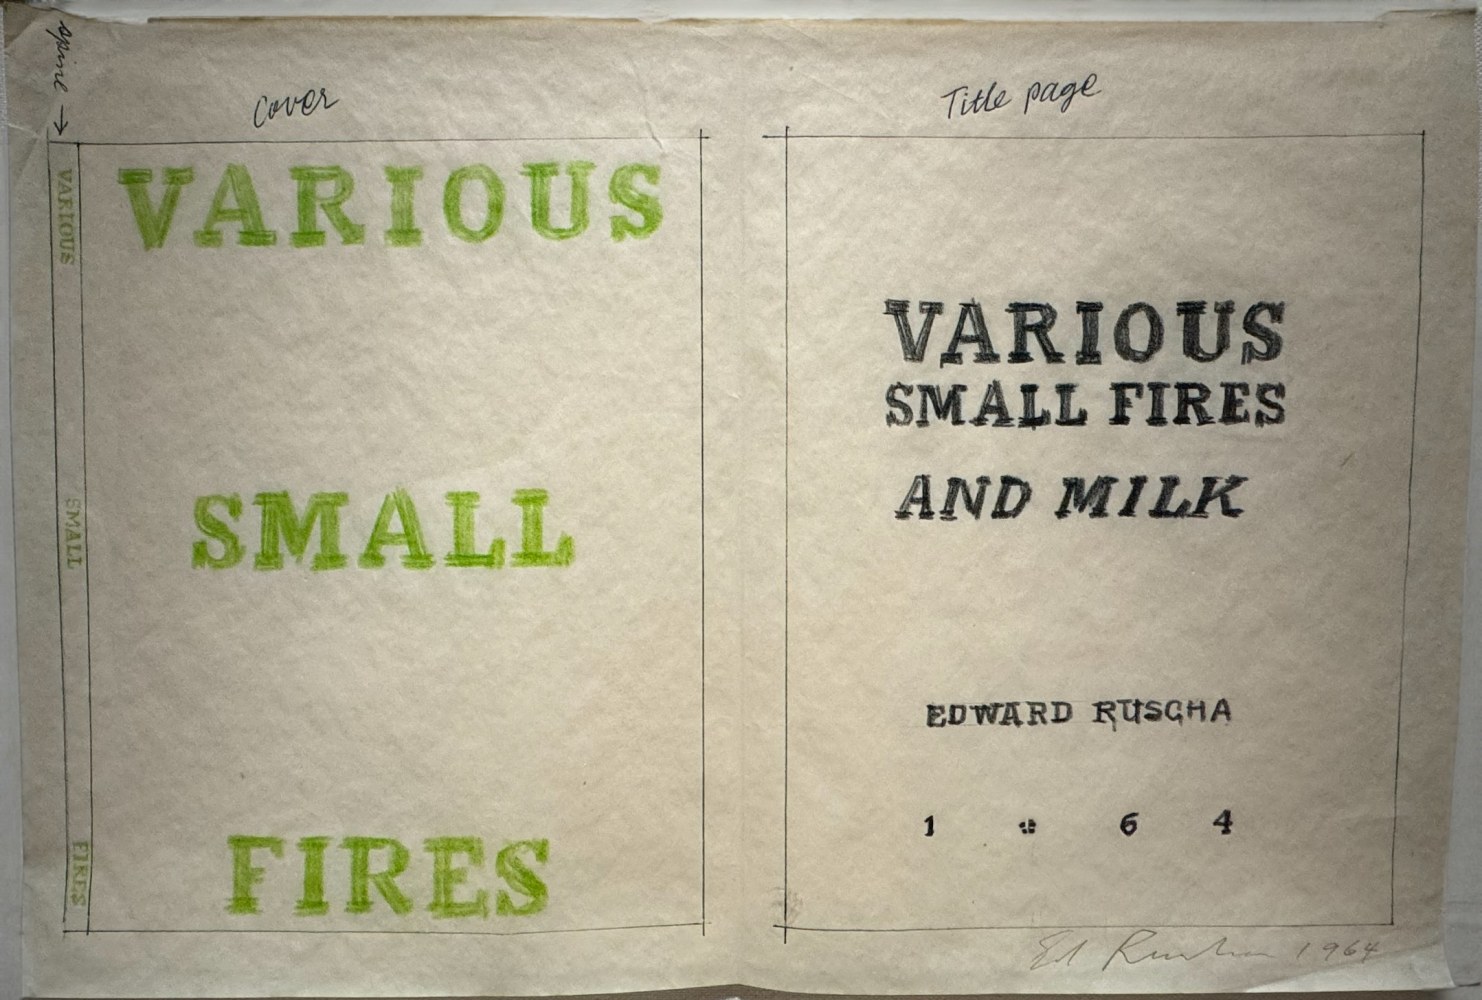 Ed Ruscha (b. 1937)

Various Small Fires, 1964

Color pencil and ballpoint ink on paper

11 x 15 inches